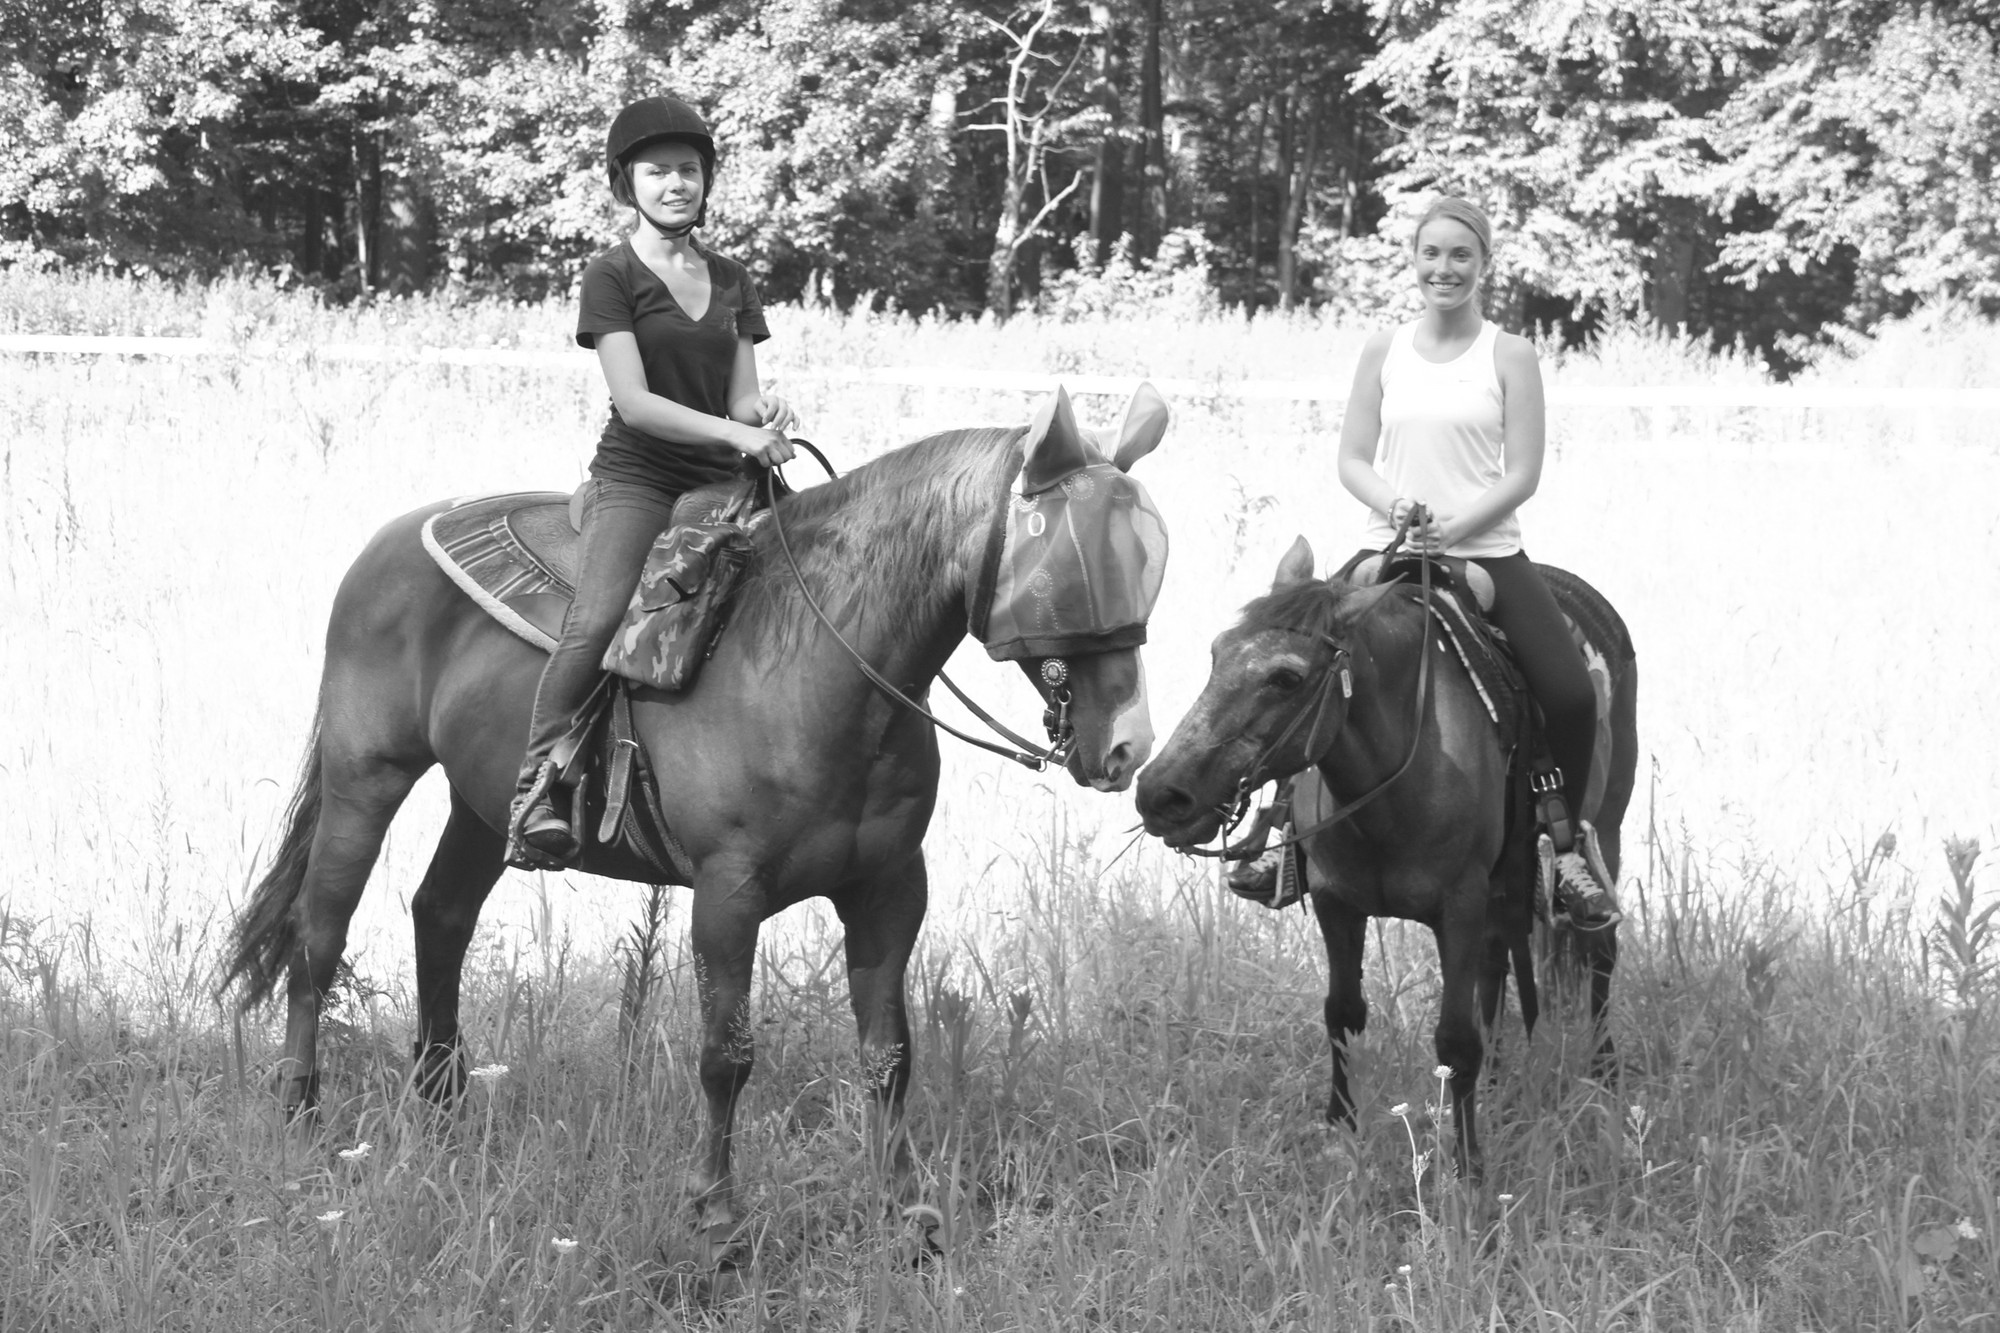 Alina Semenova on Jesse and Amanda McKelvey on Layla gave their mounts a rest at the butterfly meadow.